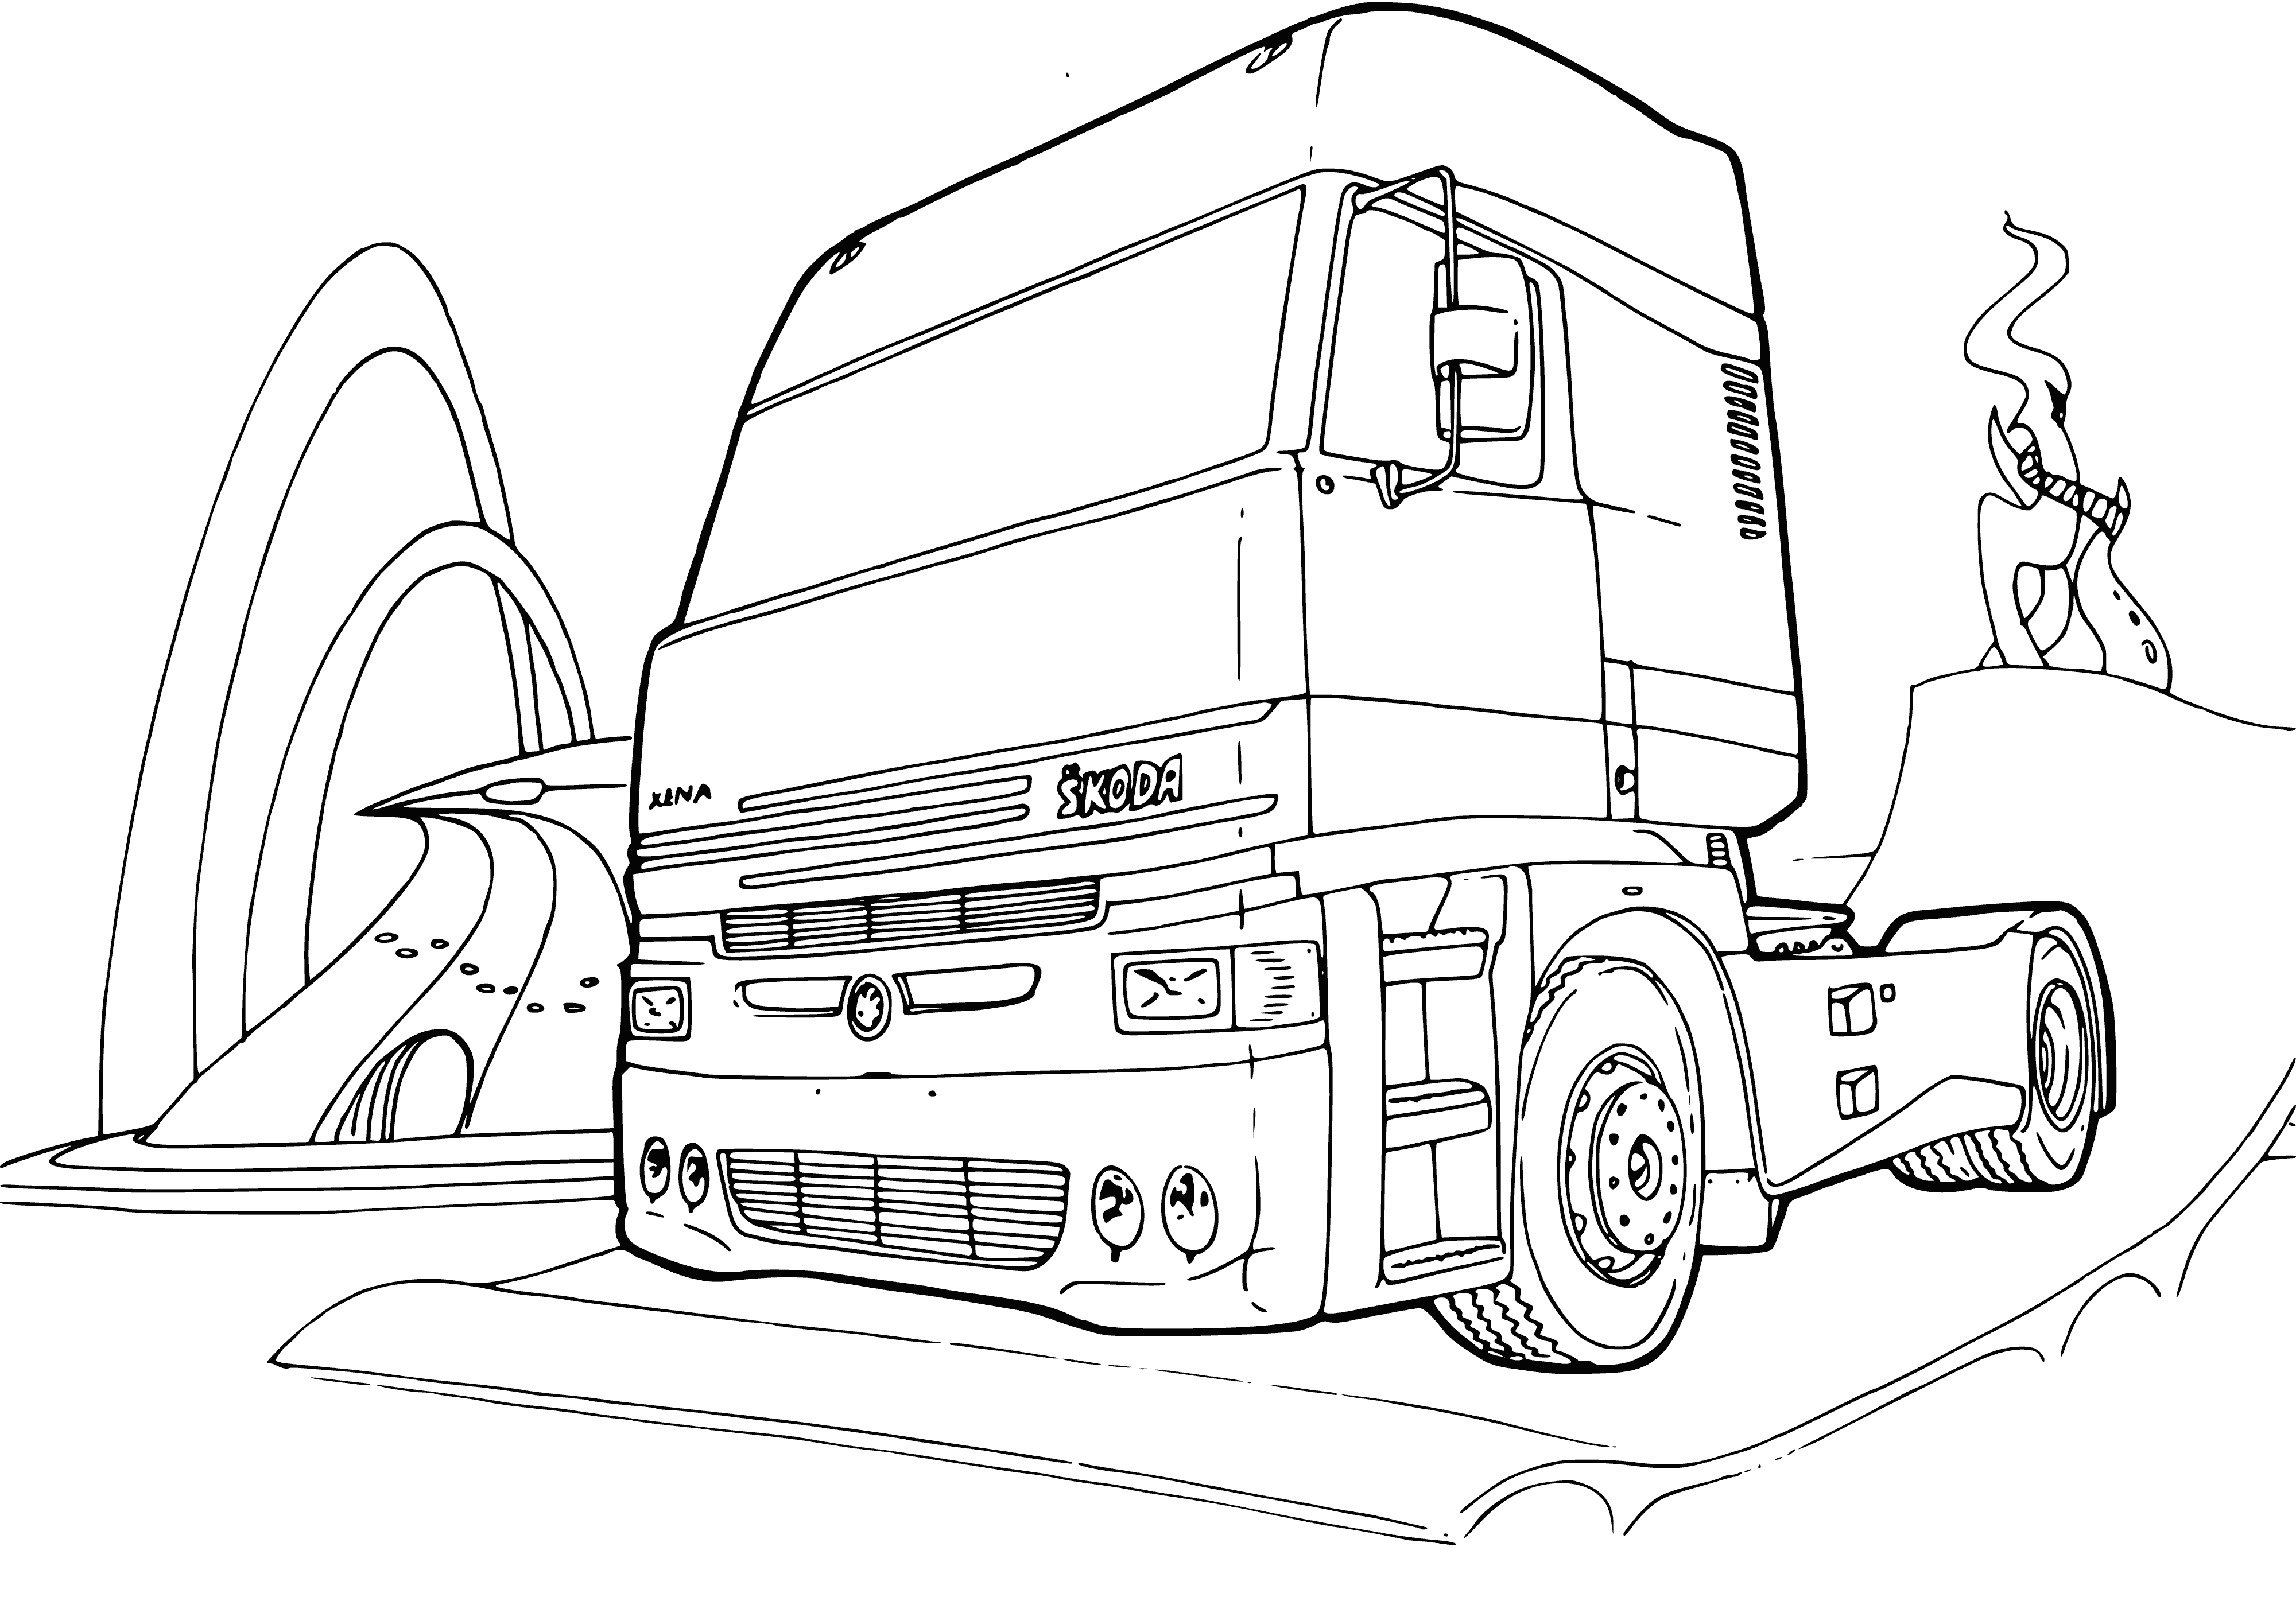 coloring page: Circle of trucks, tractors & dump trucks of all sizes & colors, some w/ headlights on & beds up. #trucks